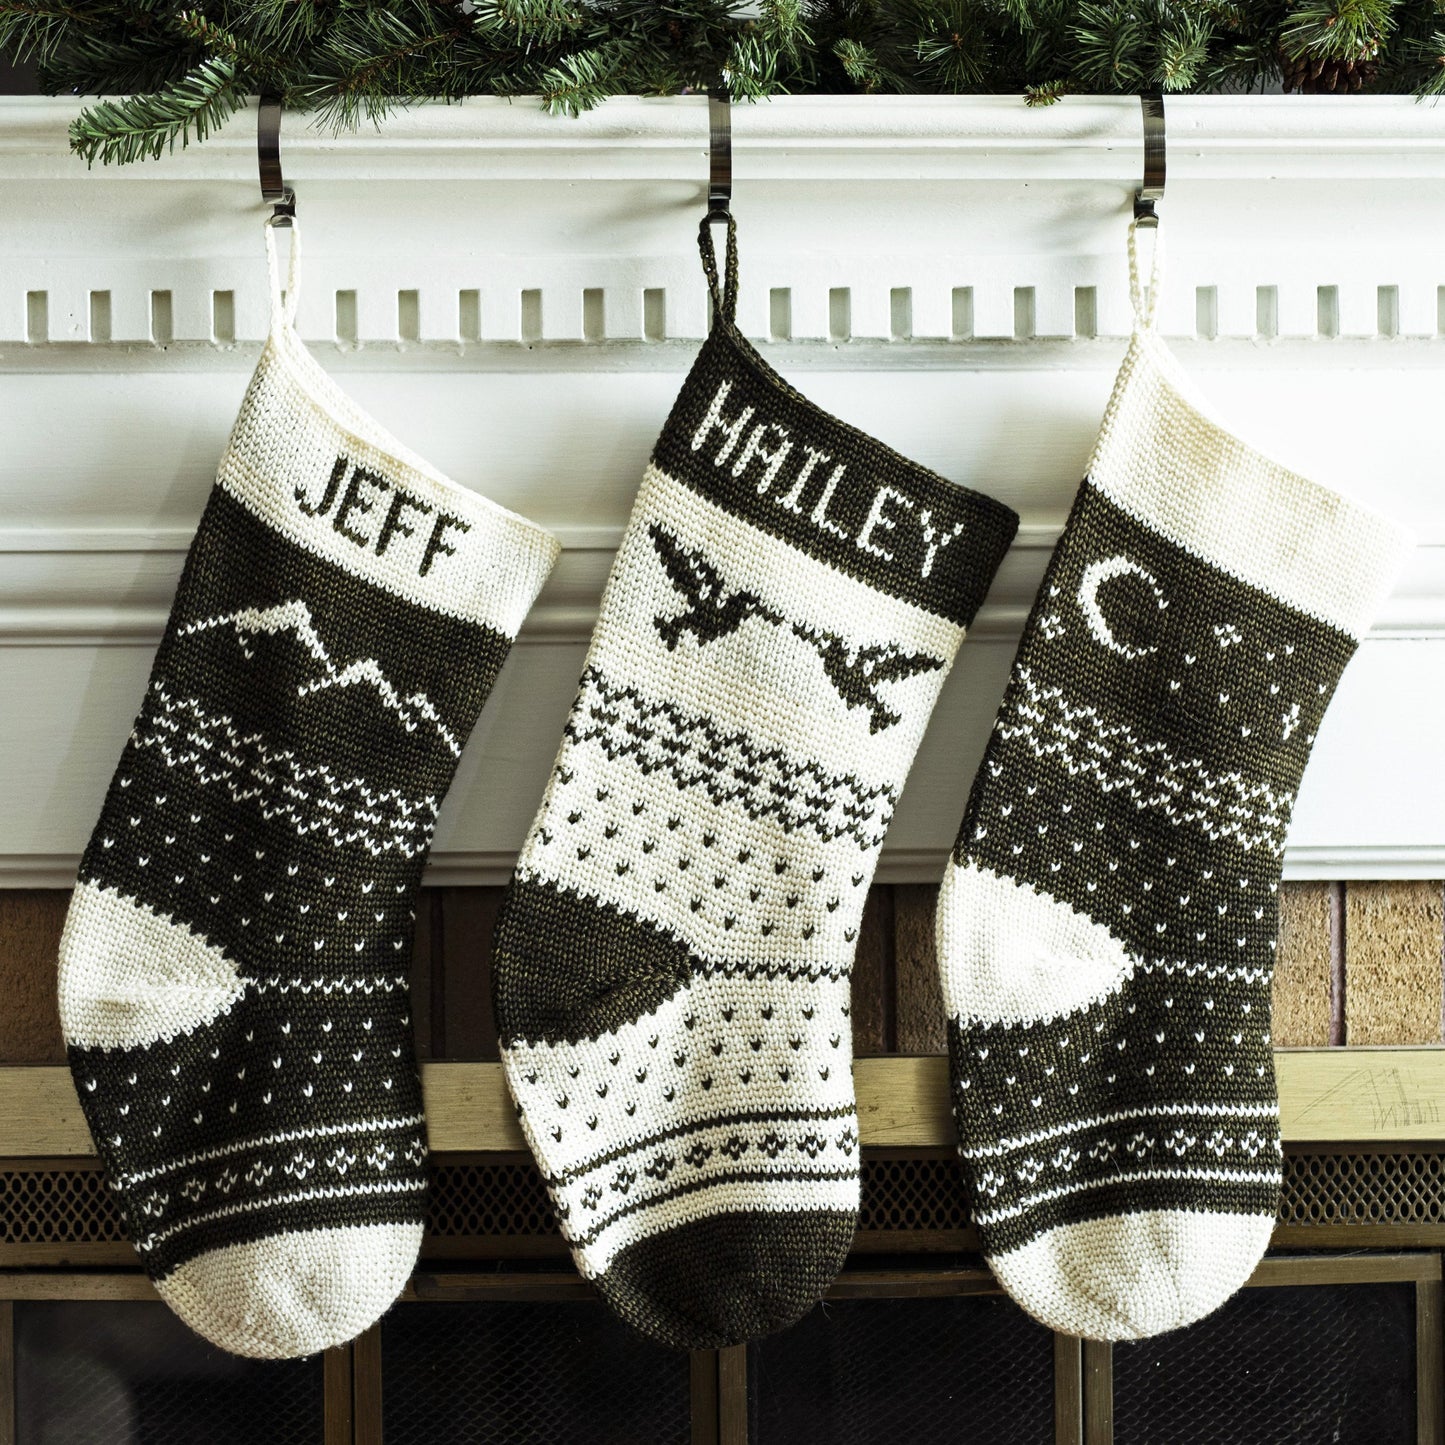 Crochet Pattern: The Forest Fair Isle Stocking